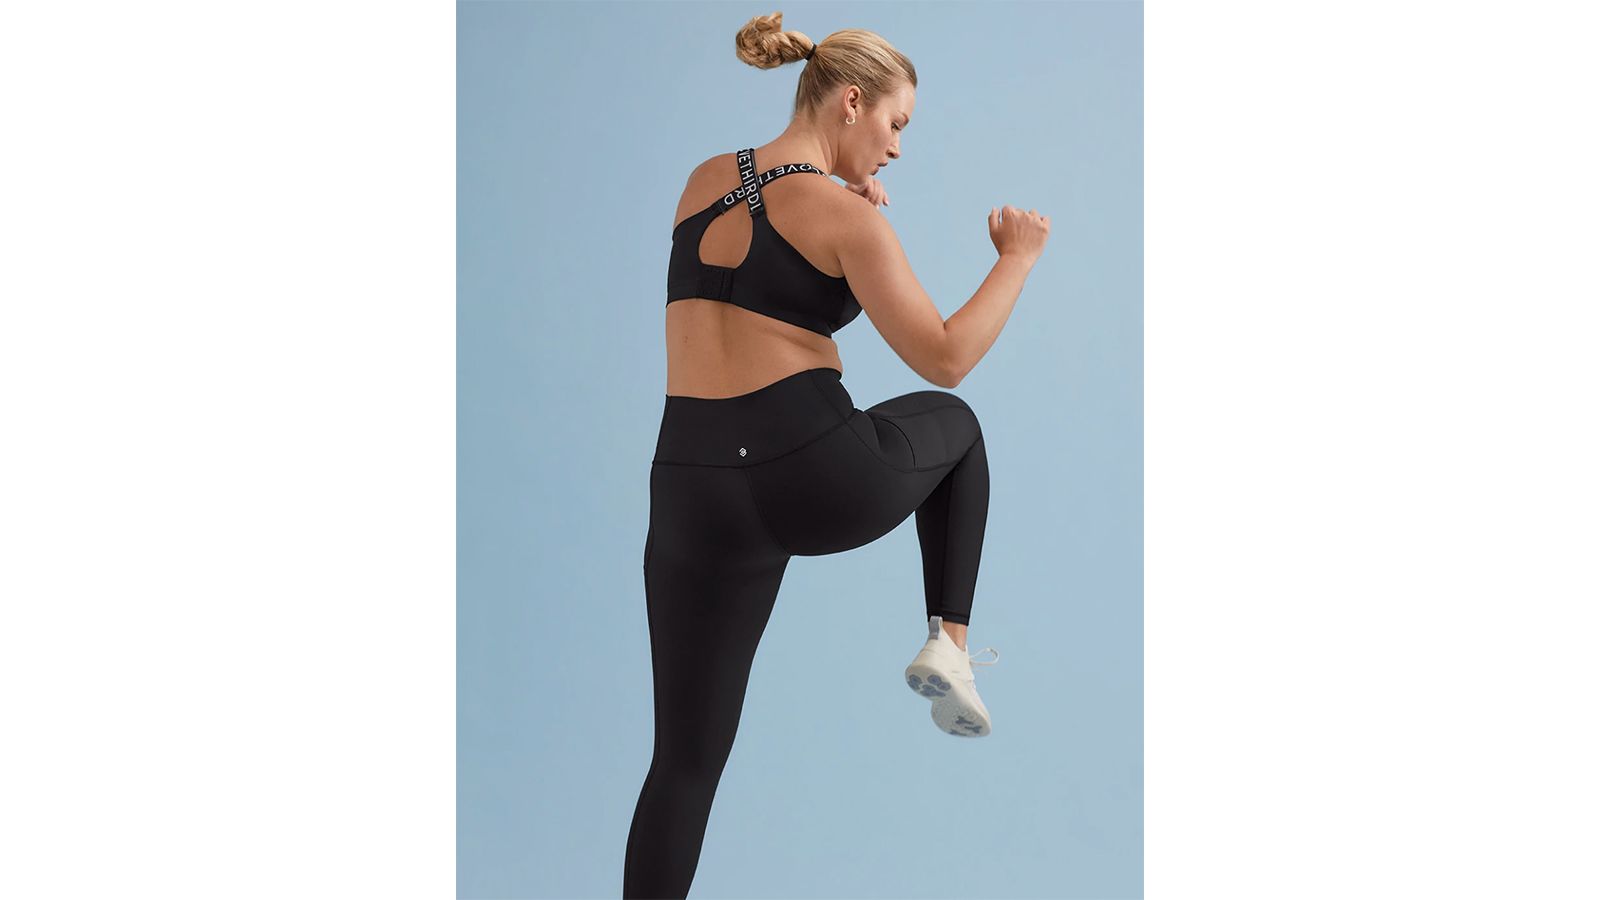 ThirdLove Adds Sports Bras as it Expands Into Activewear